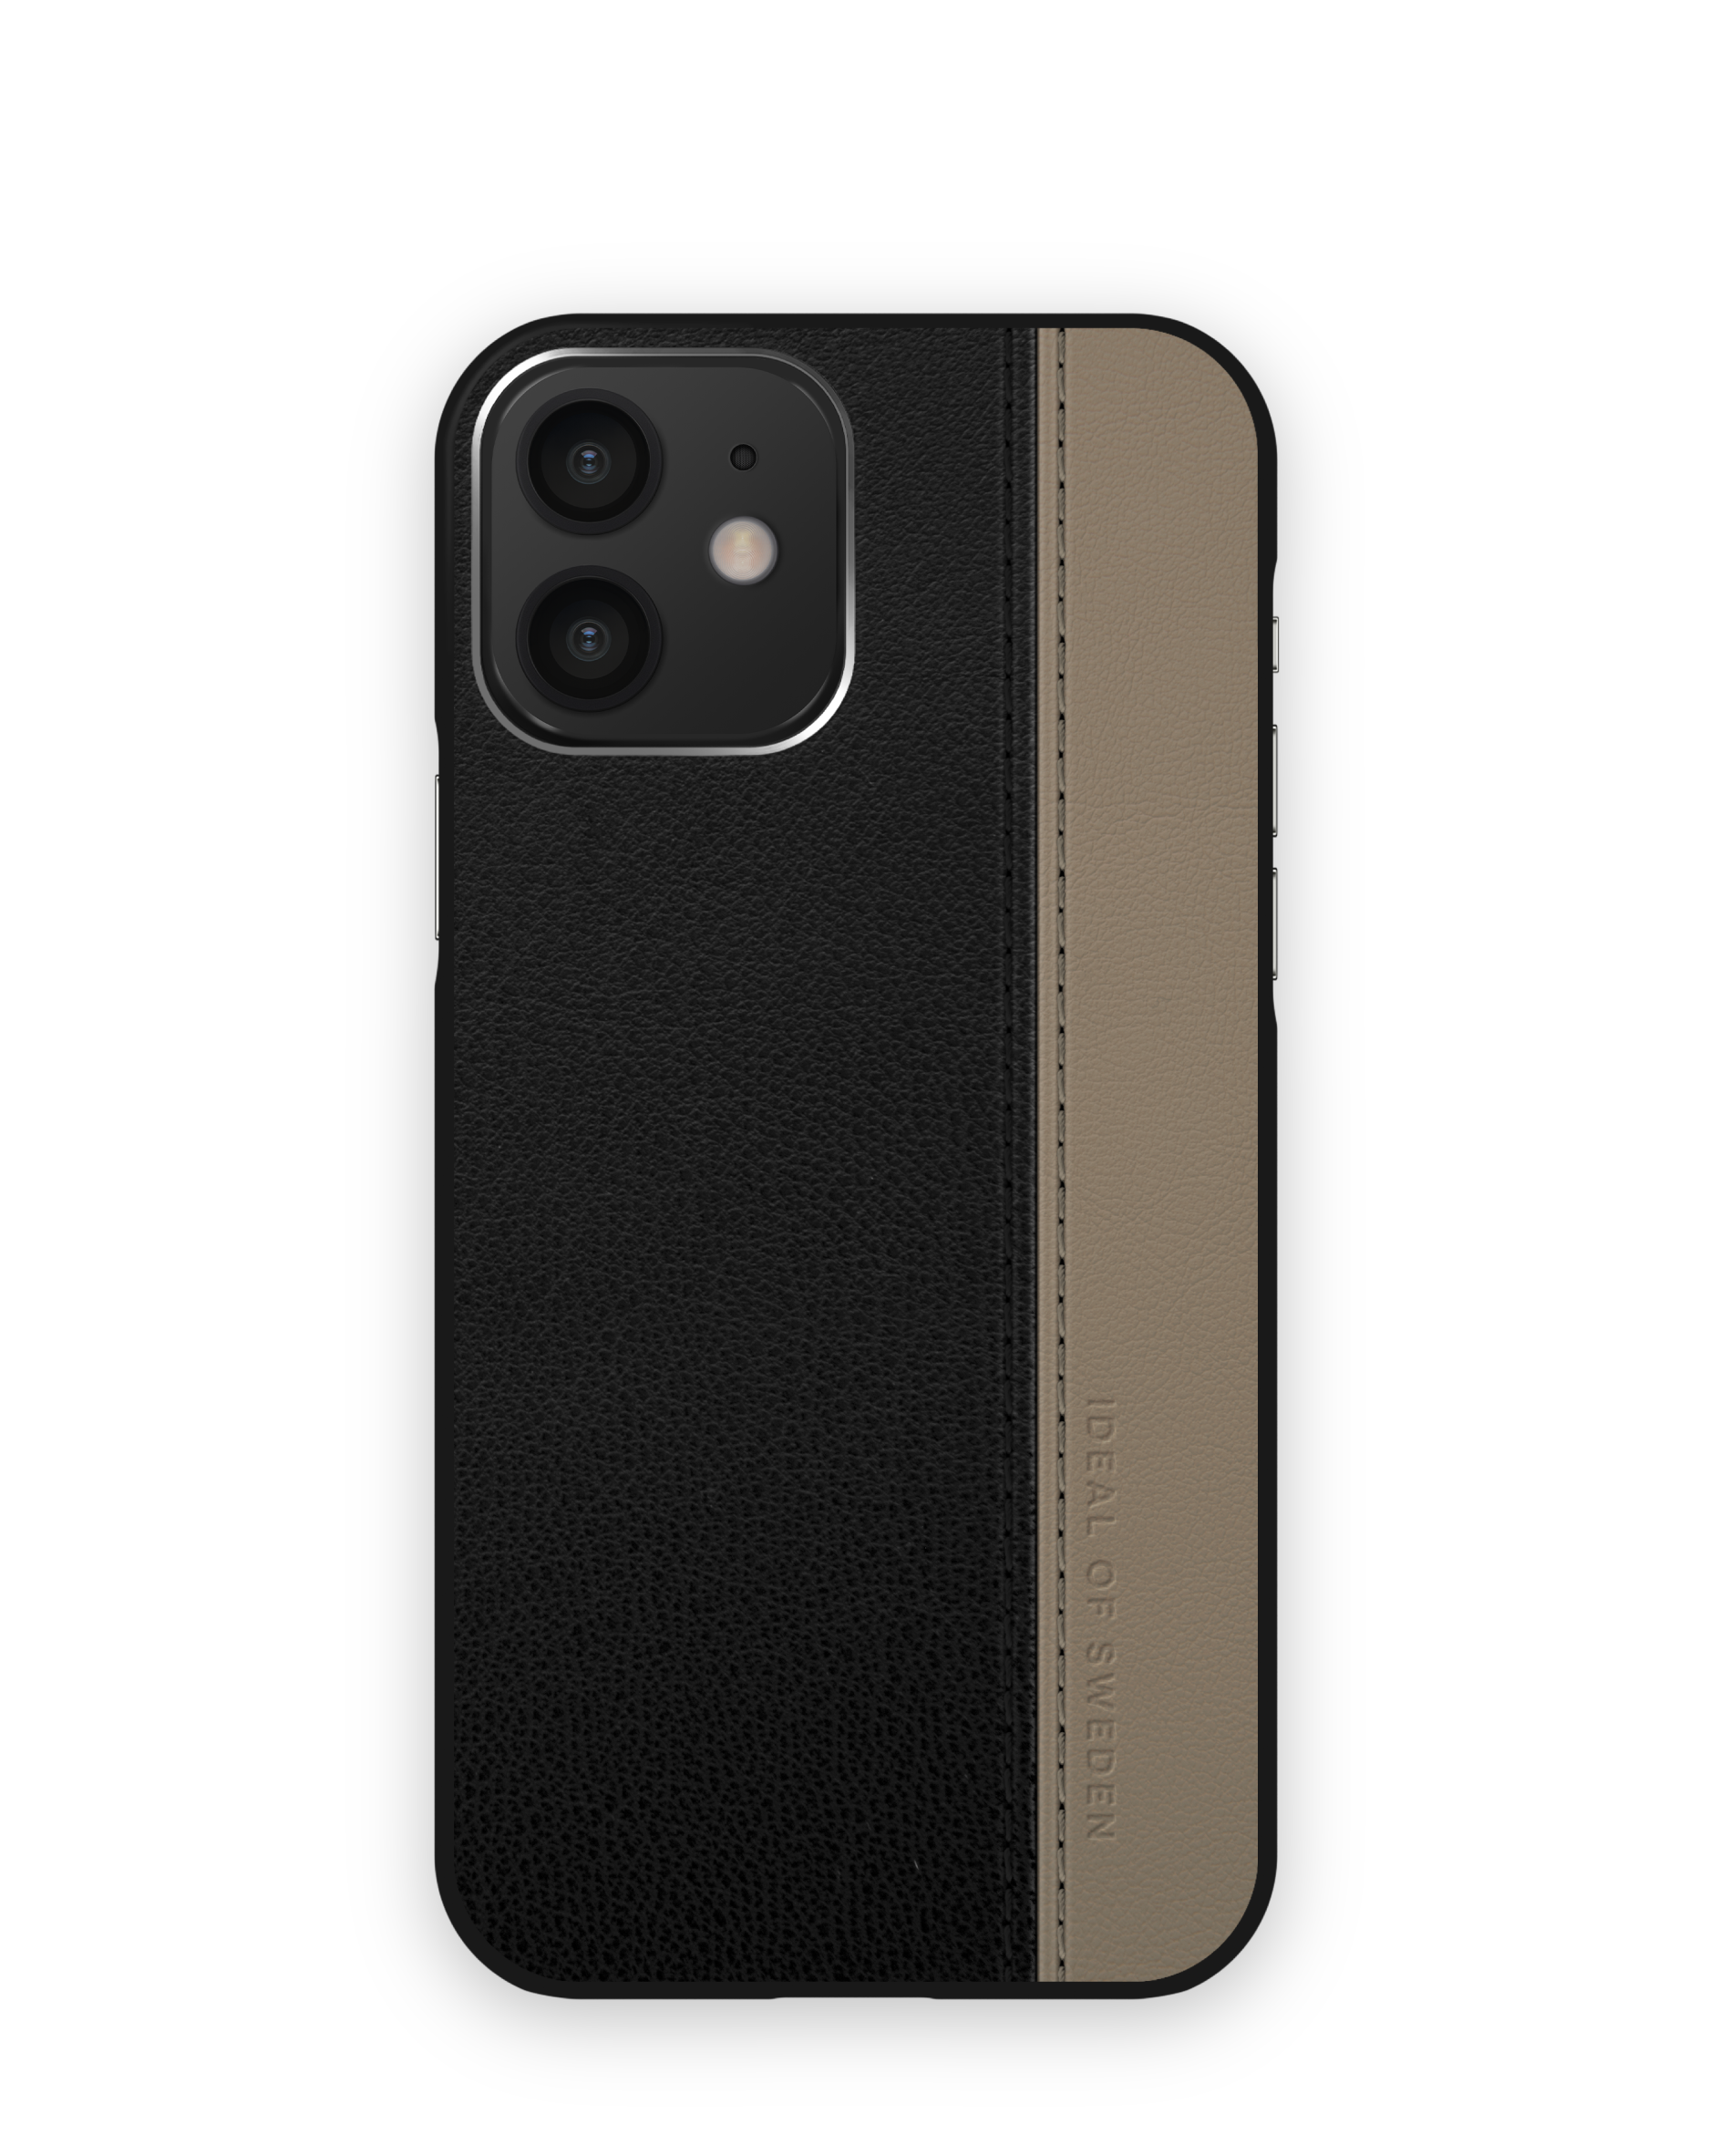 IDEAL OF Pro, Backcover, Apple, iPhone IDACSS22-I2061-403, Charcoal 12/12 Black SWEDEN